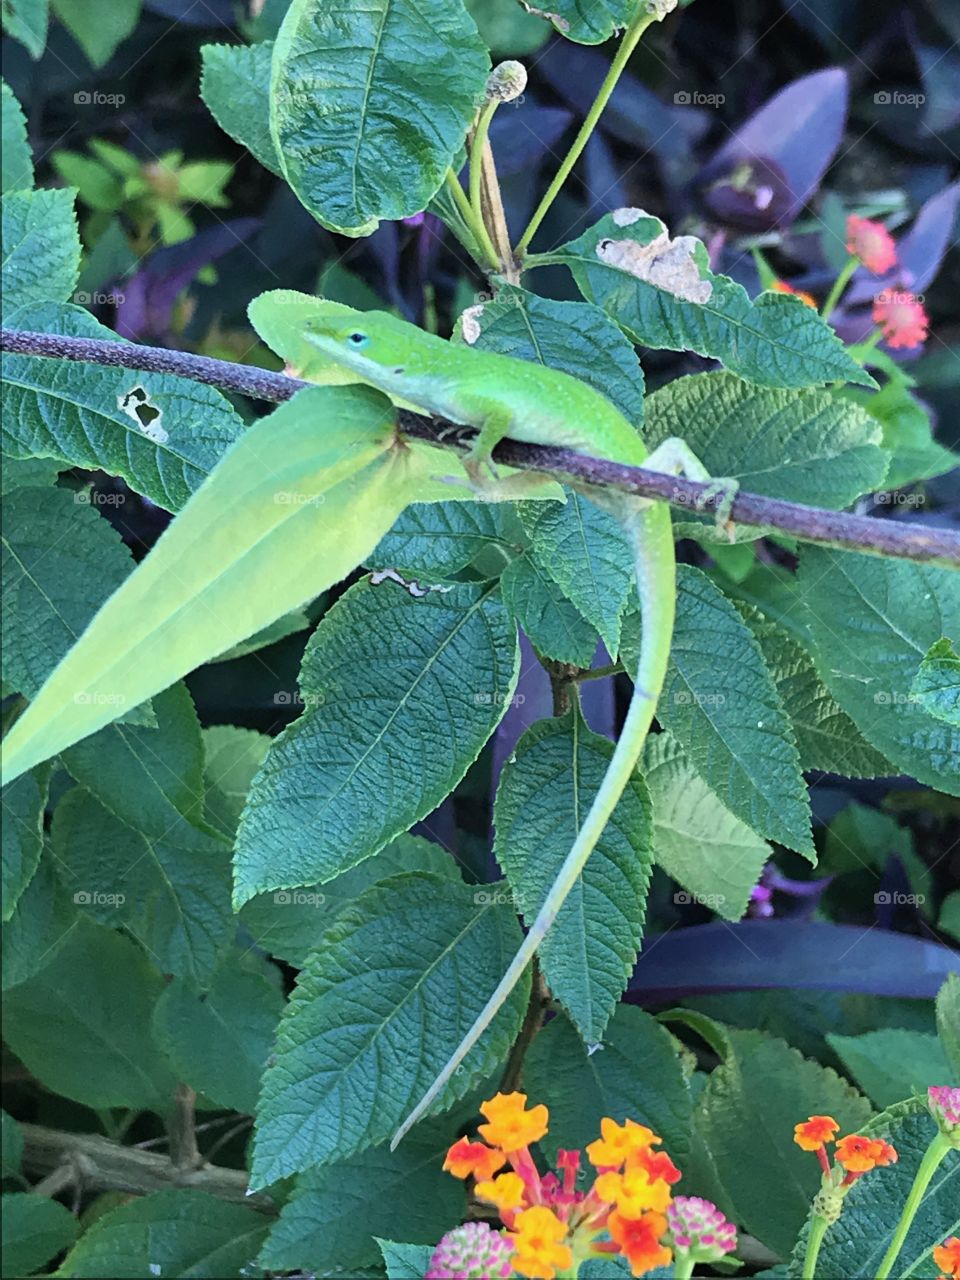 Cute Green Anole Lizard with a Long Tail